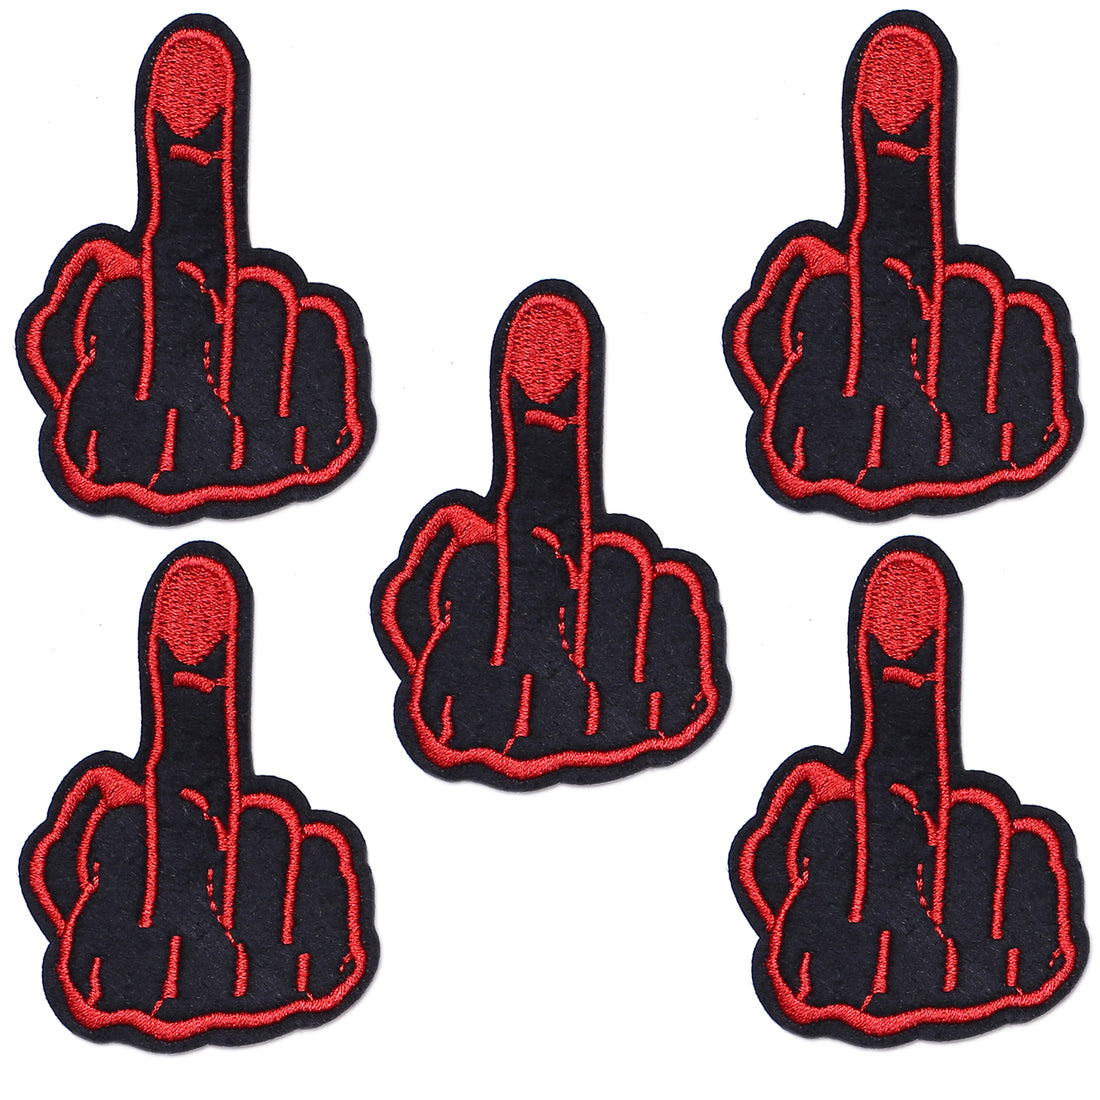 5Pcs Middle Finger Embroidered Iron on Patch for Clothes, Iron-on Patches / Sew-on Appliques Patches for Clothing, Jackets, Backpacks, Caps, Jeans